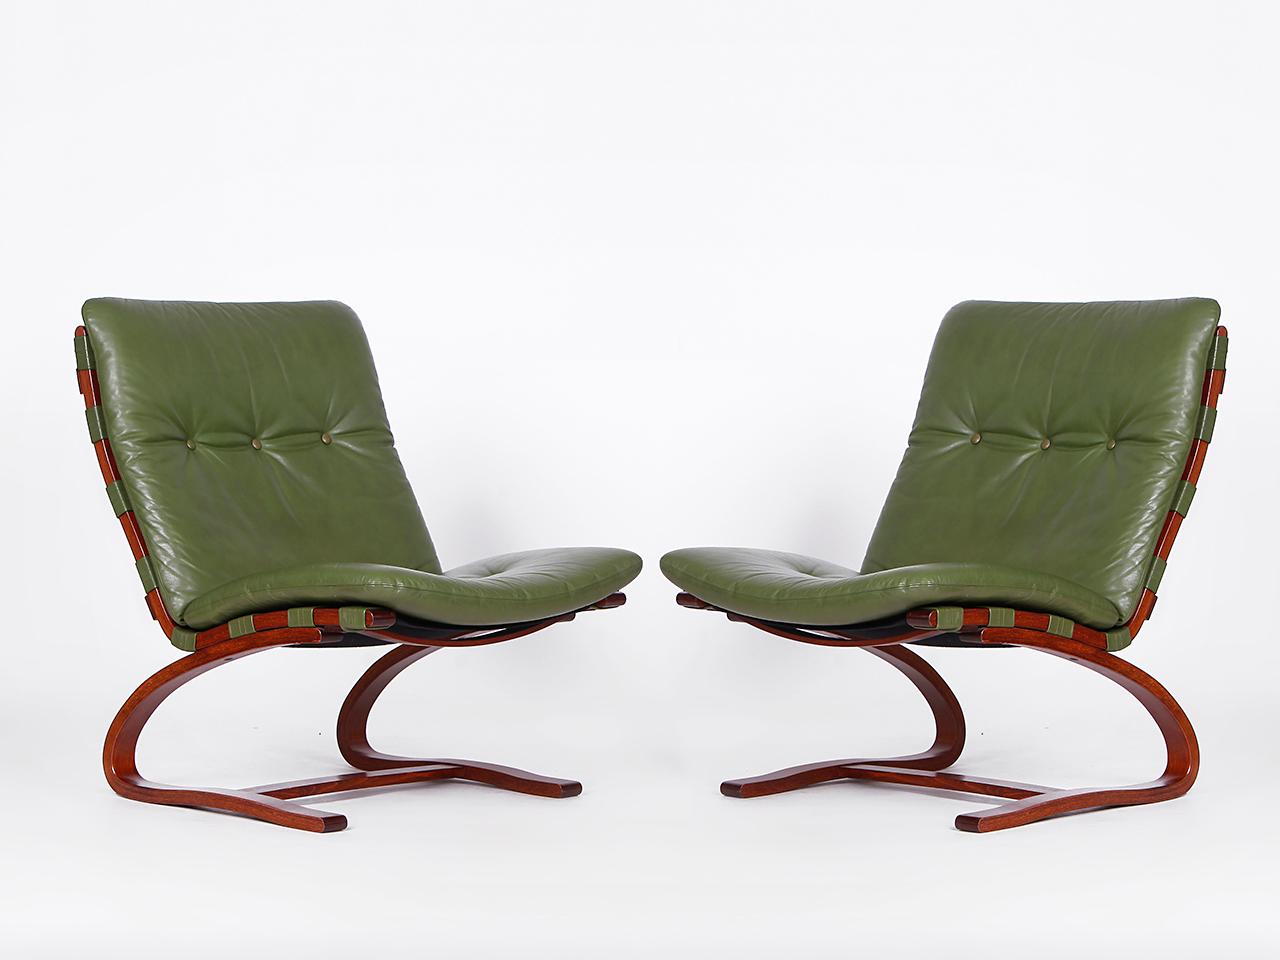 These 4  Mic-Century leather chairs from the 1960s are in exceptionally good original condition.
The old leather cover in a stylish green was demonstrably used very seldom. Ingmar Relling is
considered an icon of Scandinavian design. Bent beech